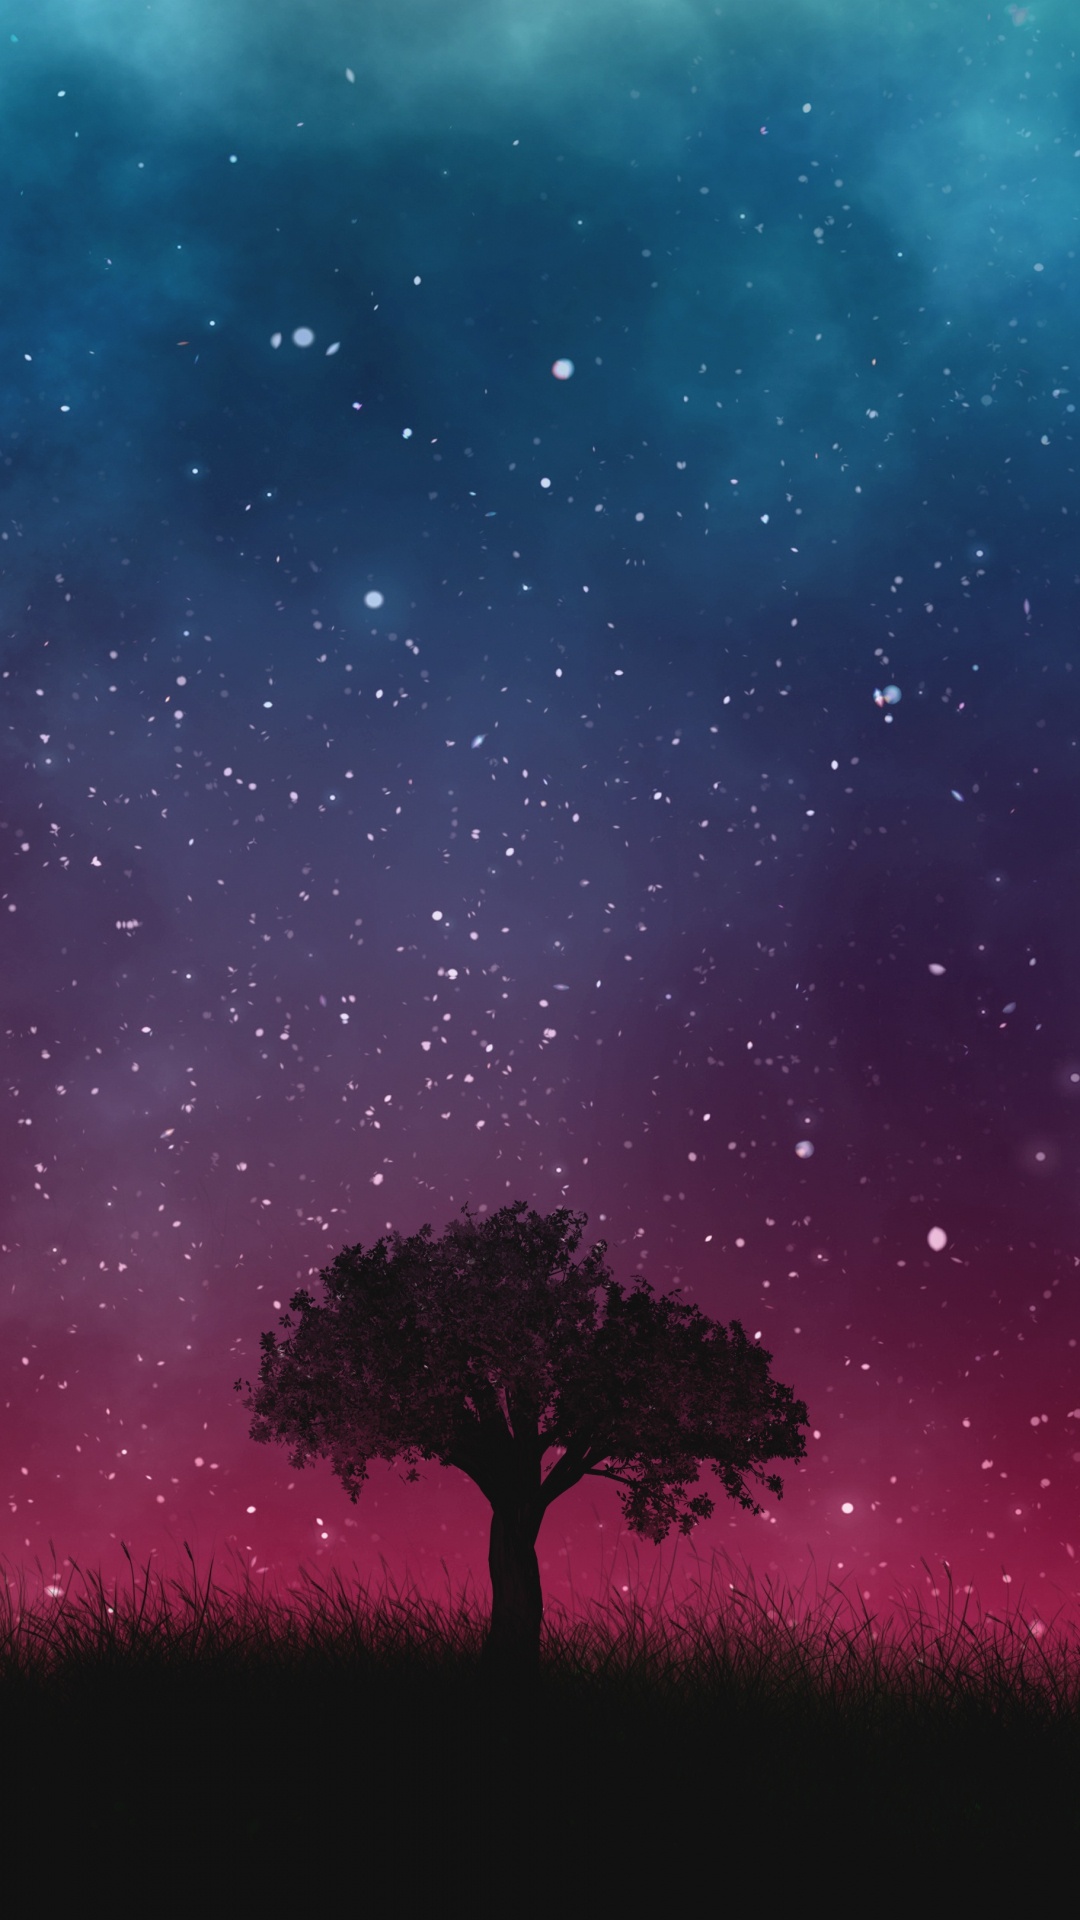 Silhouette of Tree Under Starry Night. Wallpaper in 1080x1920 Resolution